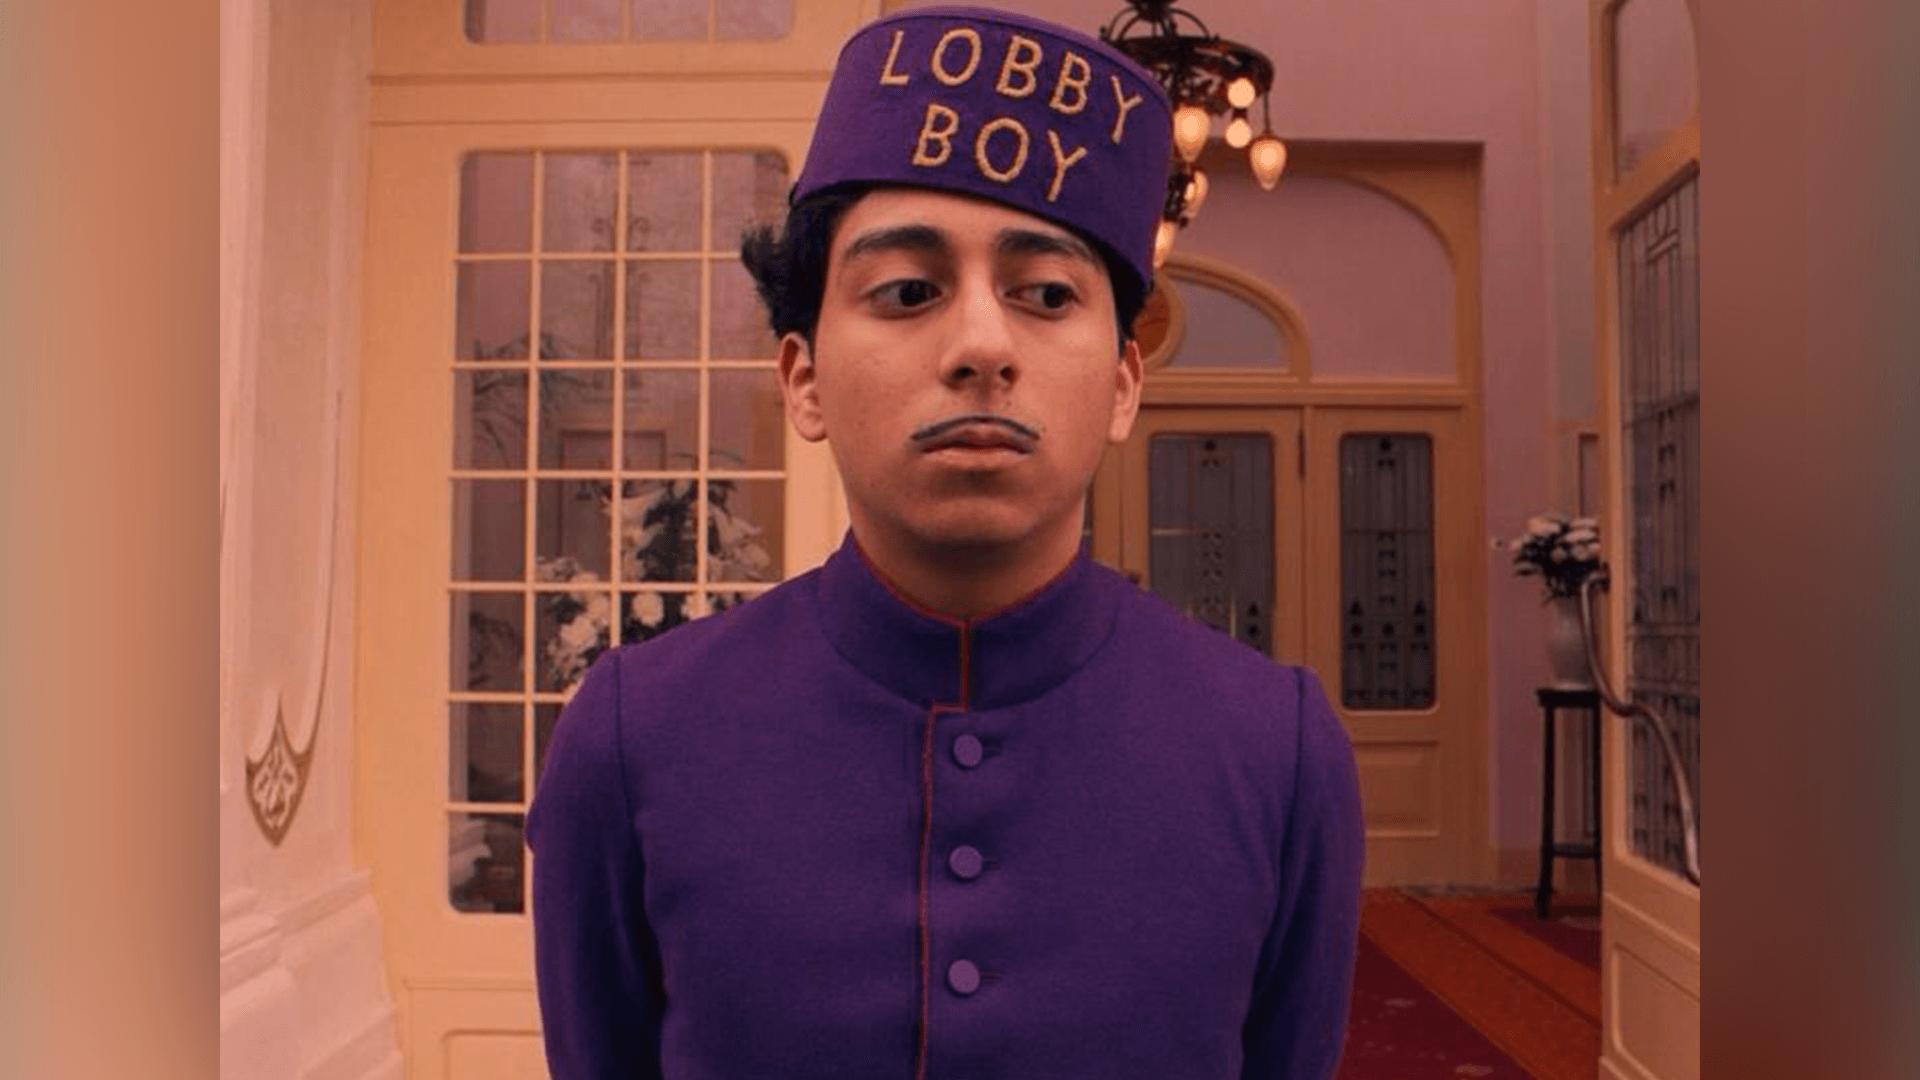 Wes Anderson scene lobby boy with purple outfit